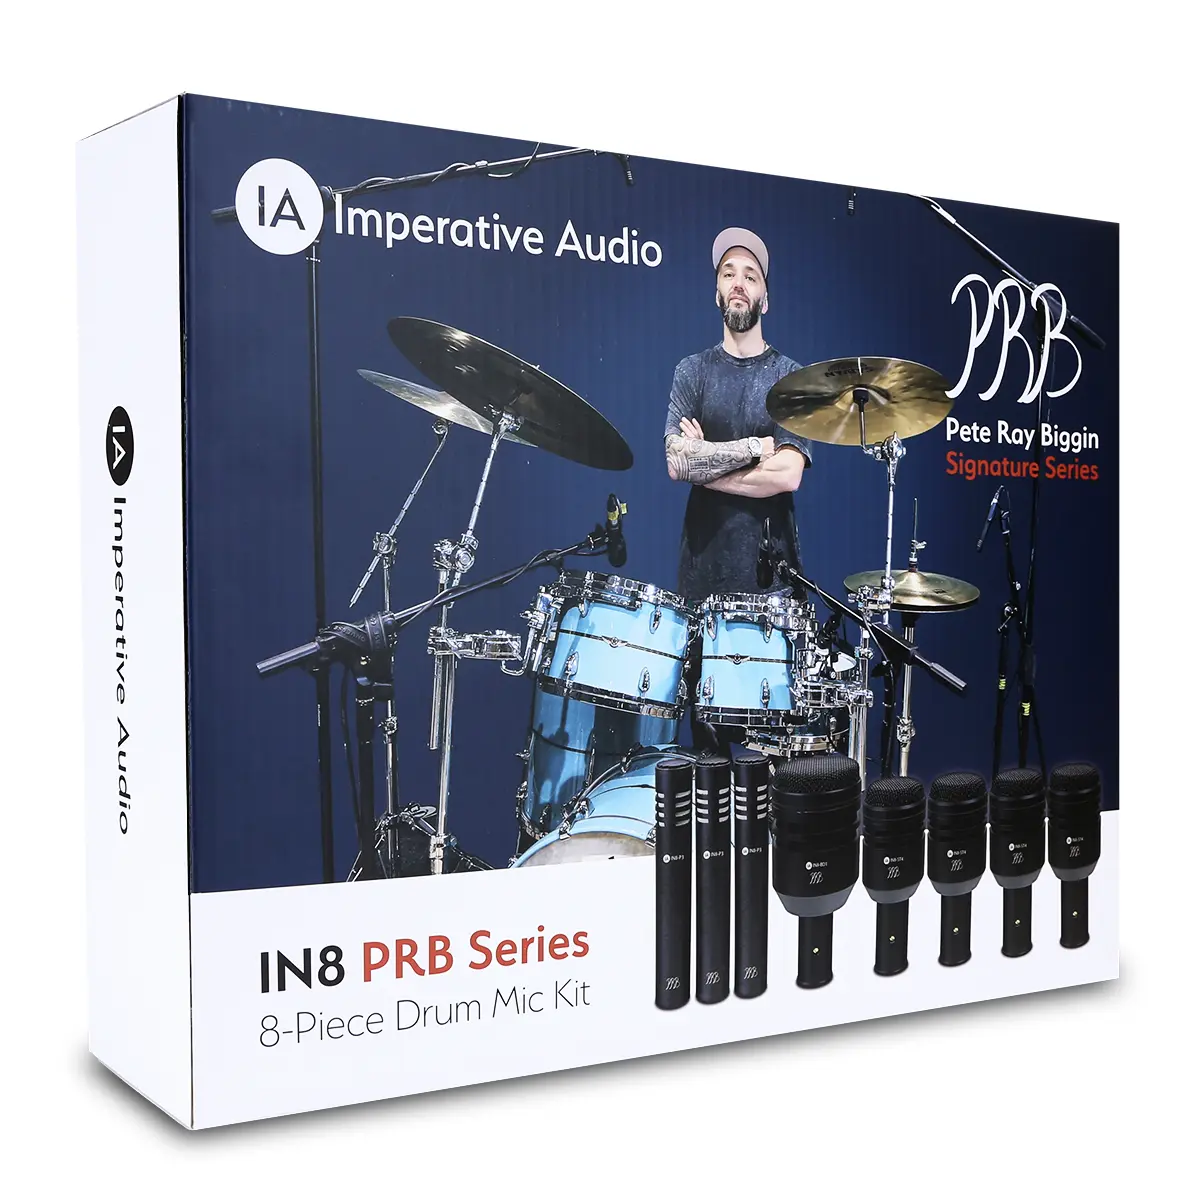 IN8 PRB Drum Mic Kit Product Box